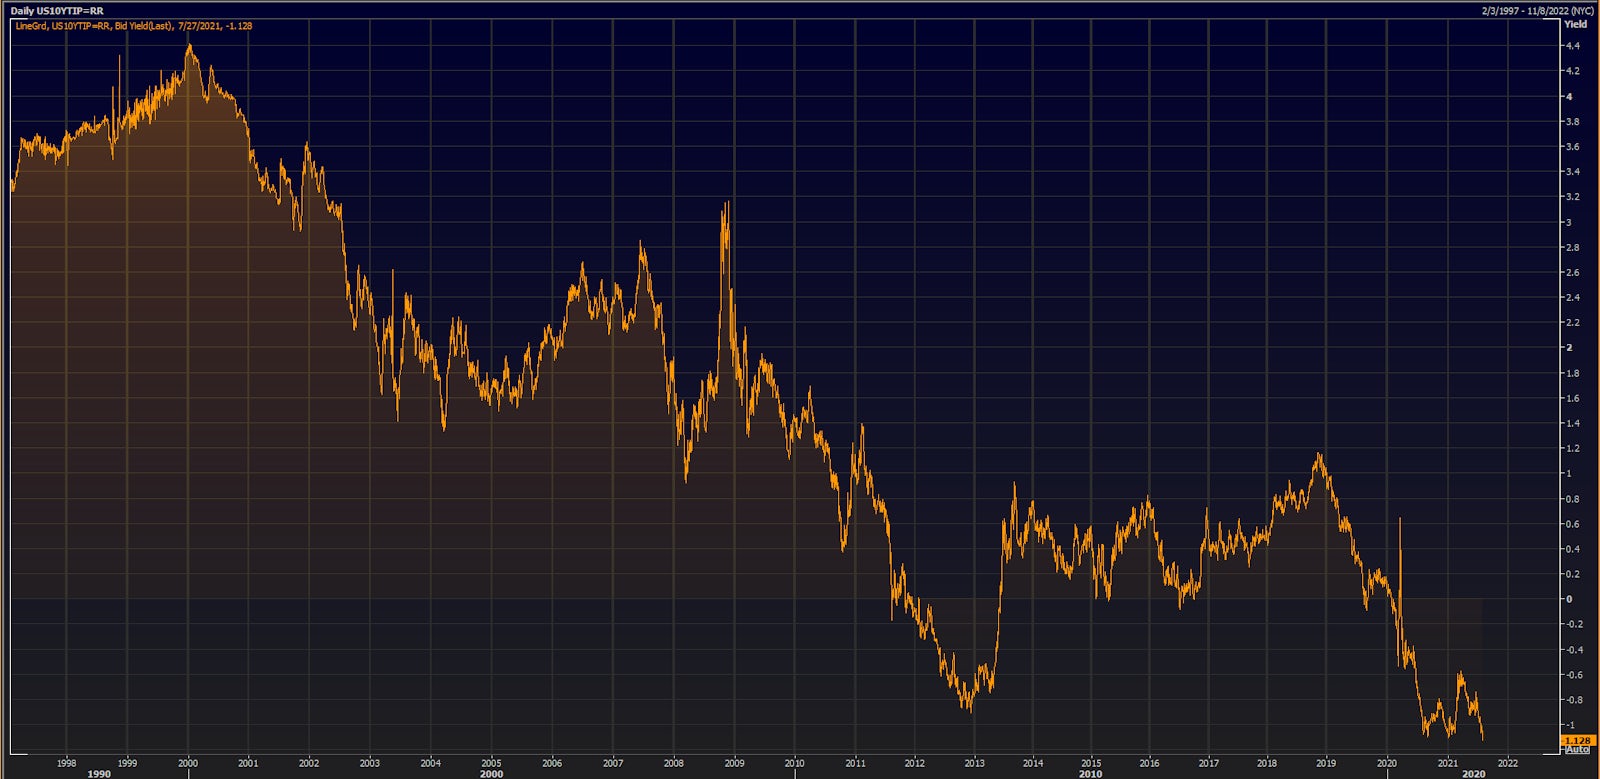 10-Year Real Yields Just Closed At New Record Low | Source: Refinitiv